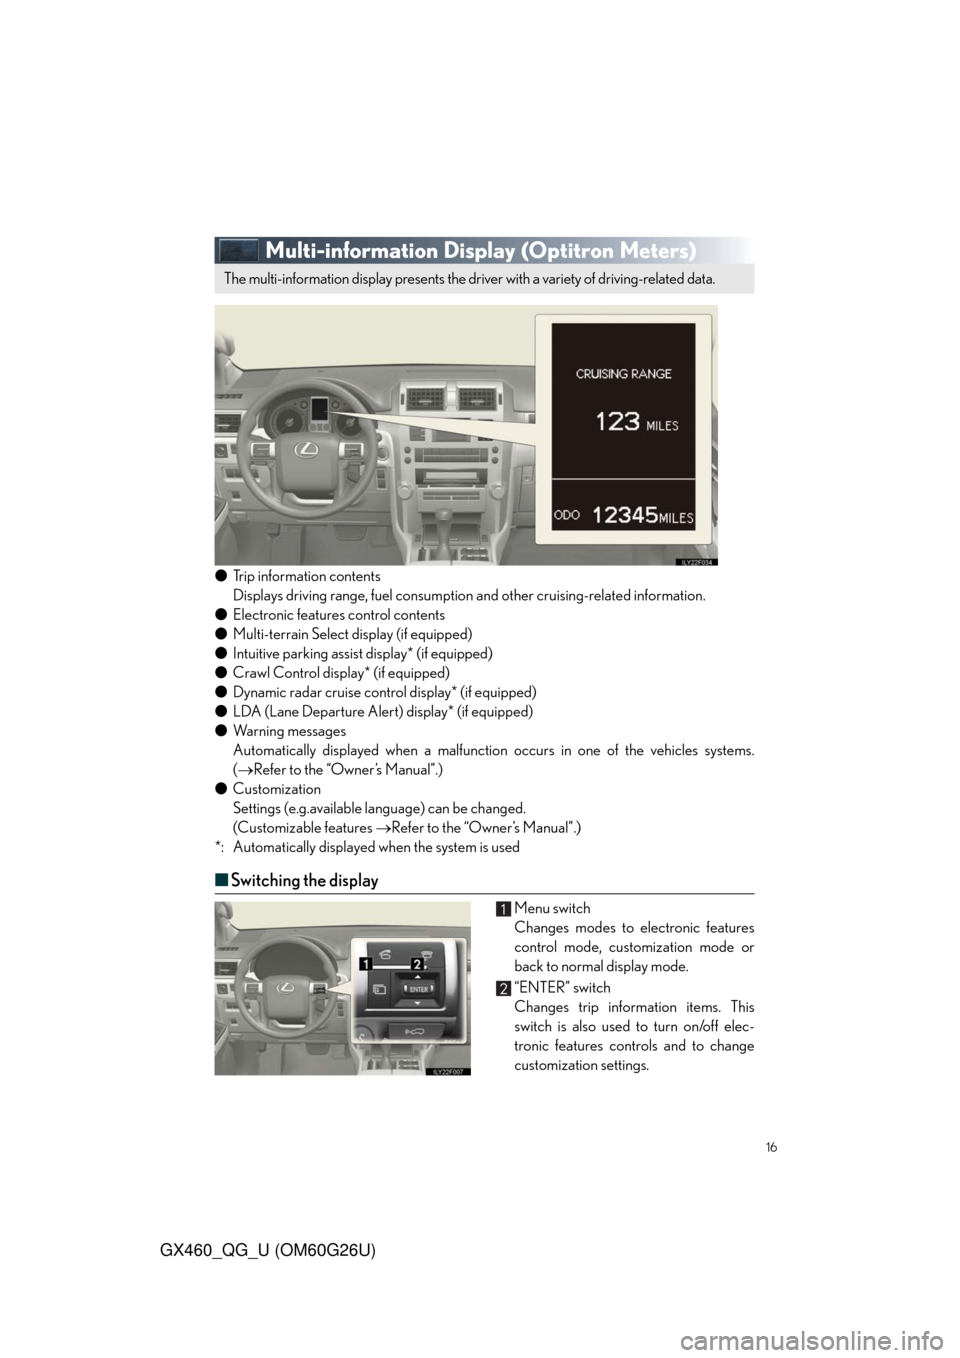 Lexus GX460 2011  Intuitive Parking Assist / LEXUS 2011 GX460  QUICK GUIDE (OM60G26U) User Guide 16
GX460_QG_U (OM60G26U)
Multi-information Display (Optitron Meters)
●Trip information contents
Displays driving range, fuel consumption and other cruising-related information.
●Electronic feature